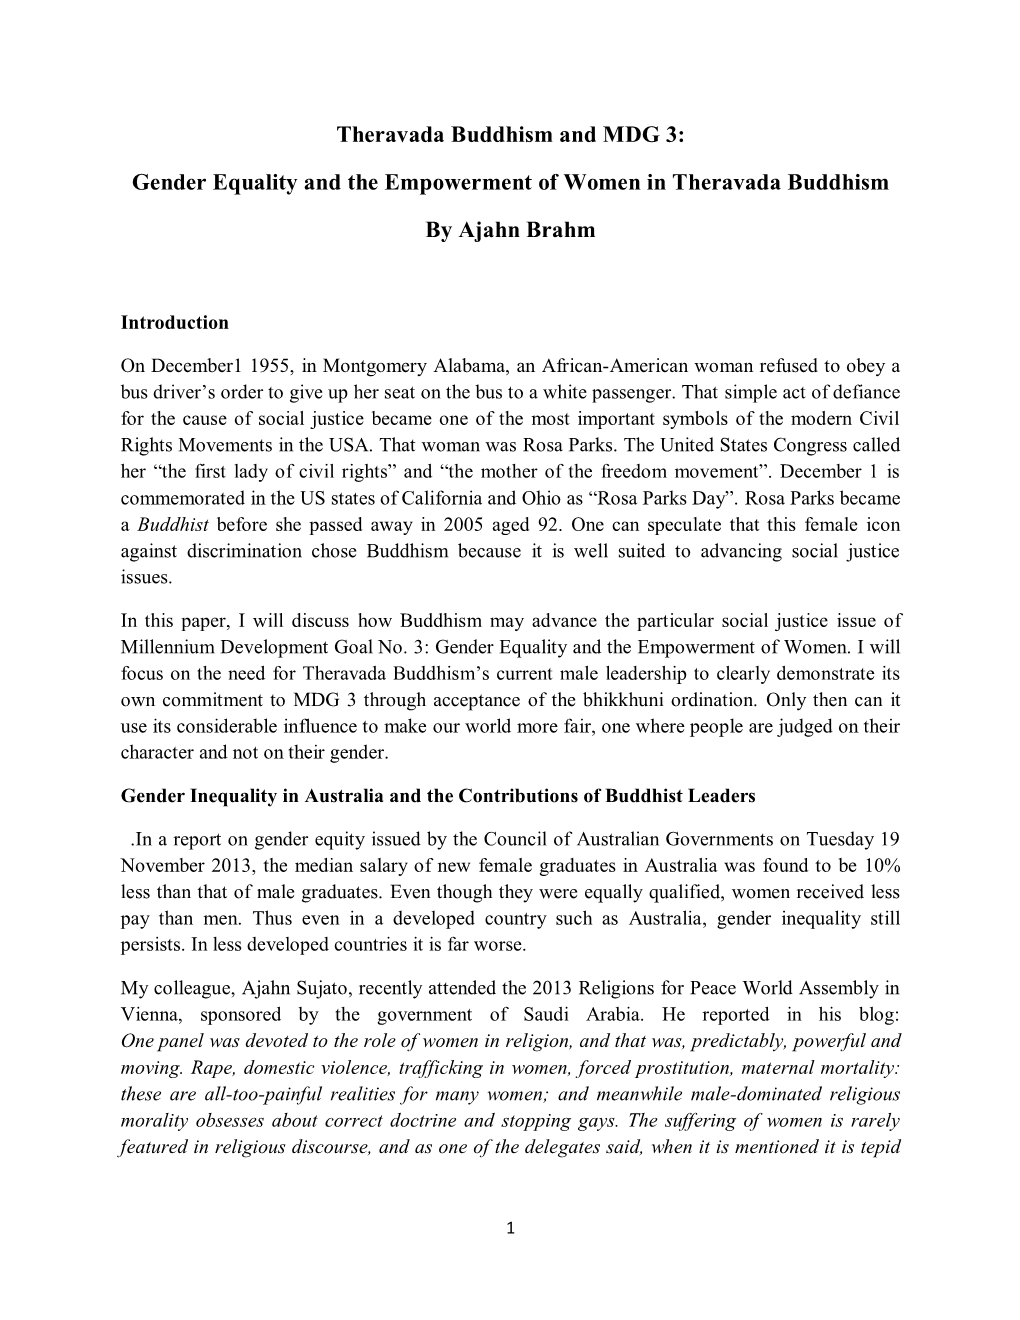 Theravada Buddhism and MDG 3: Gender Equality and The